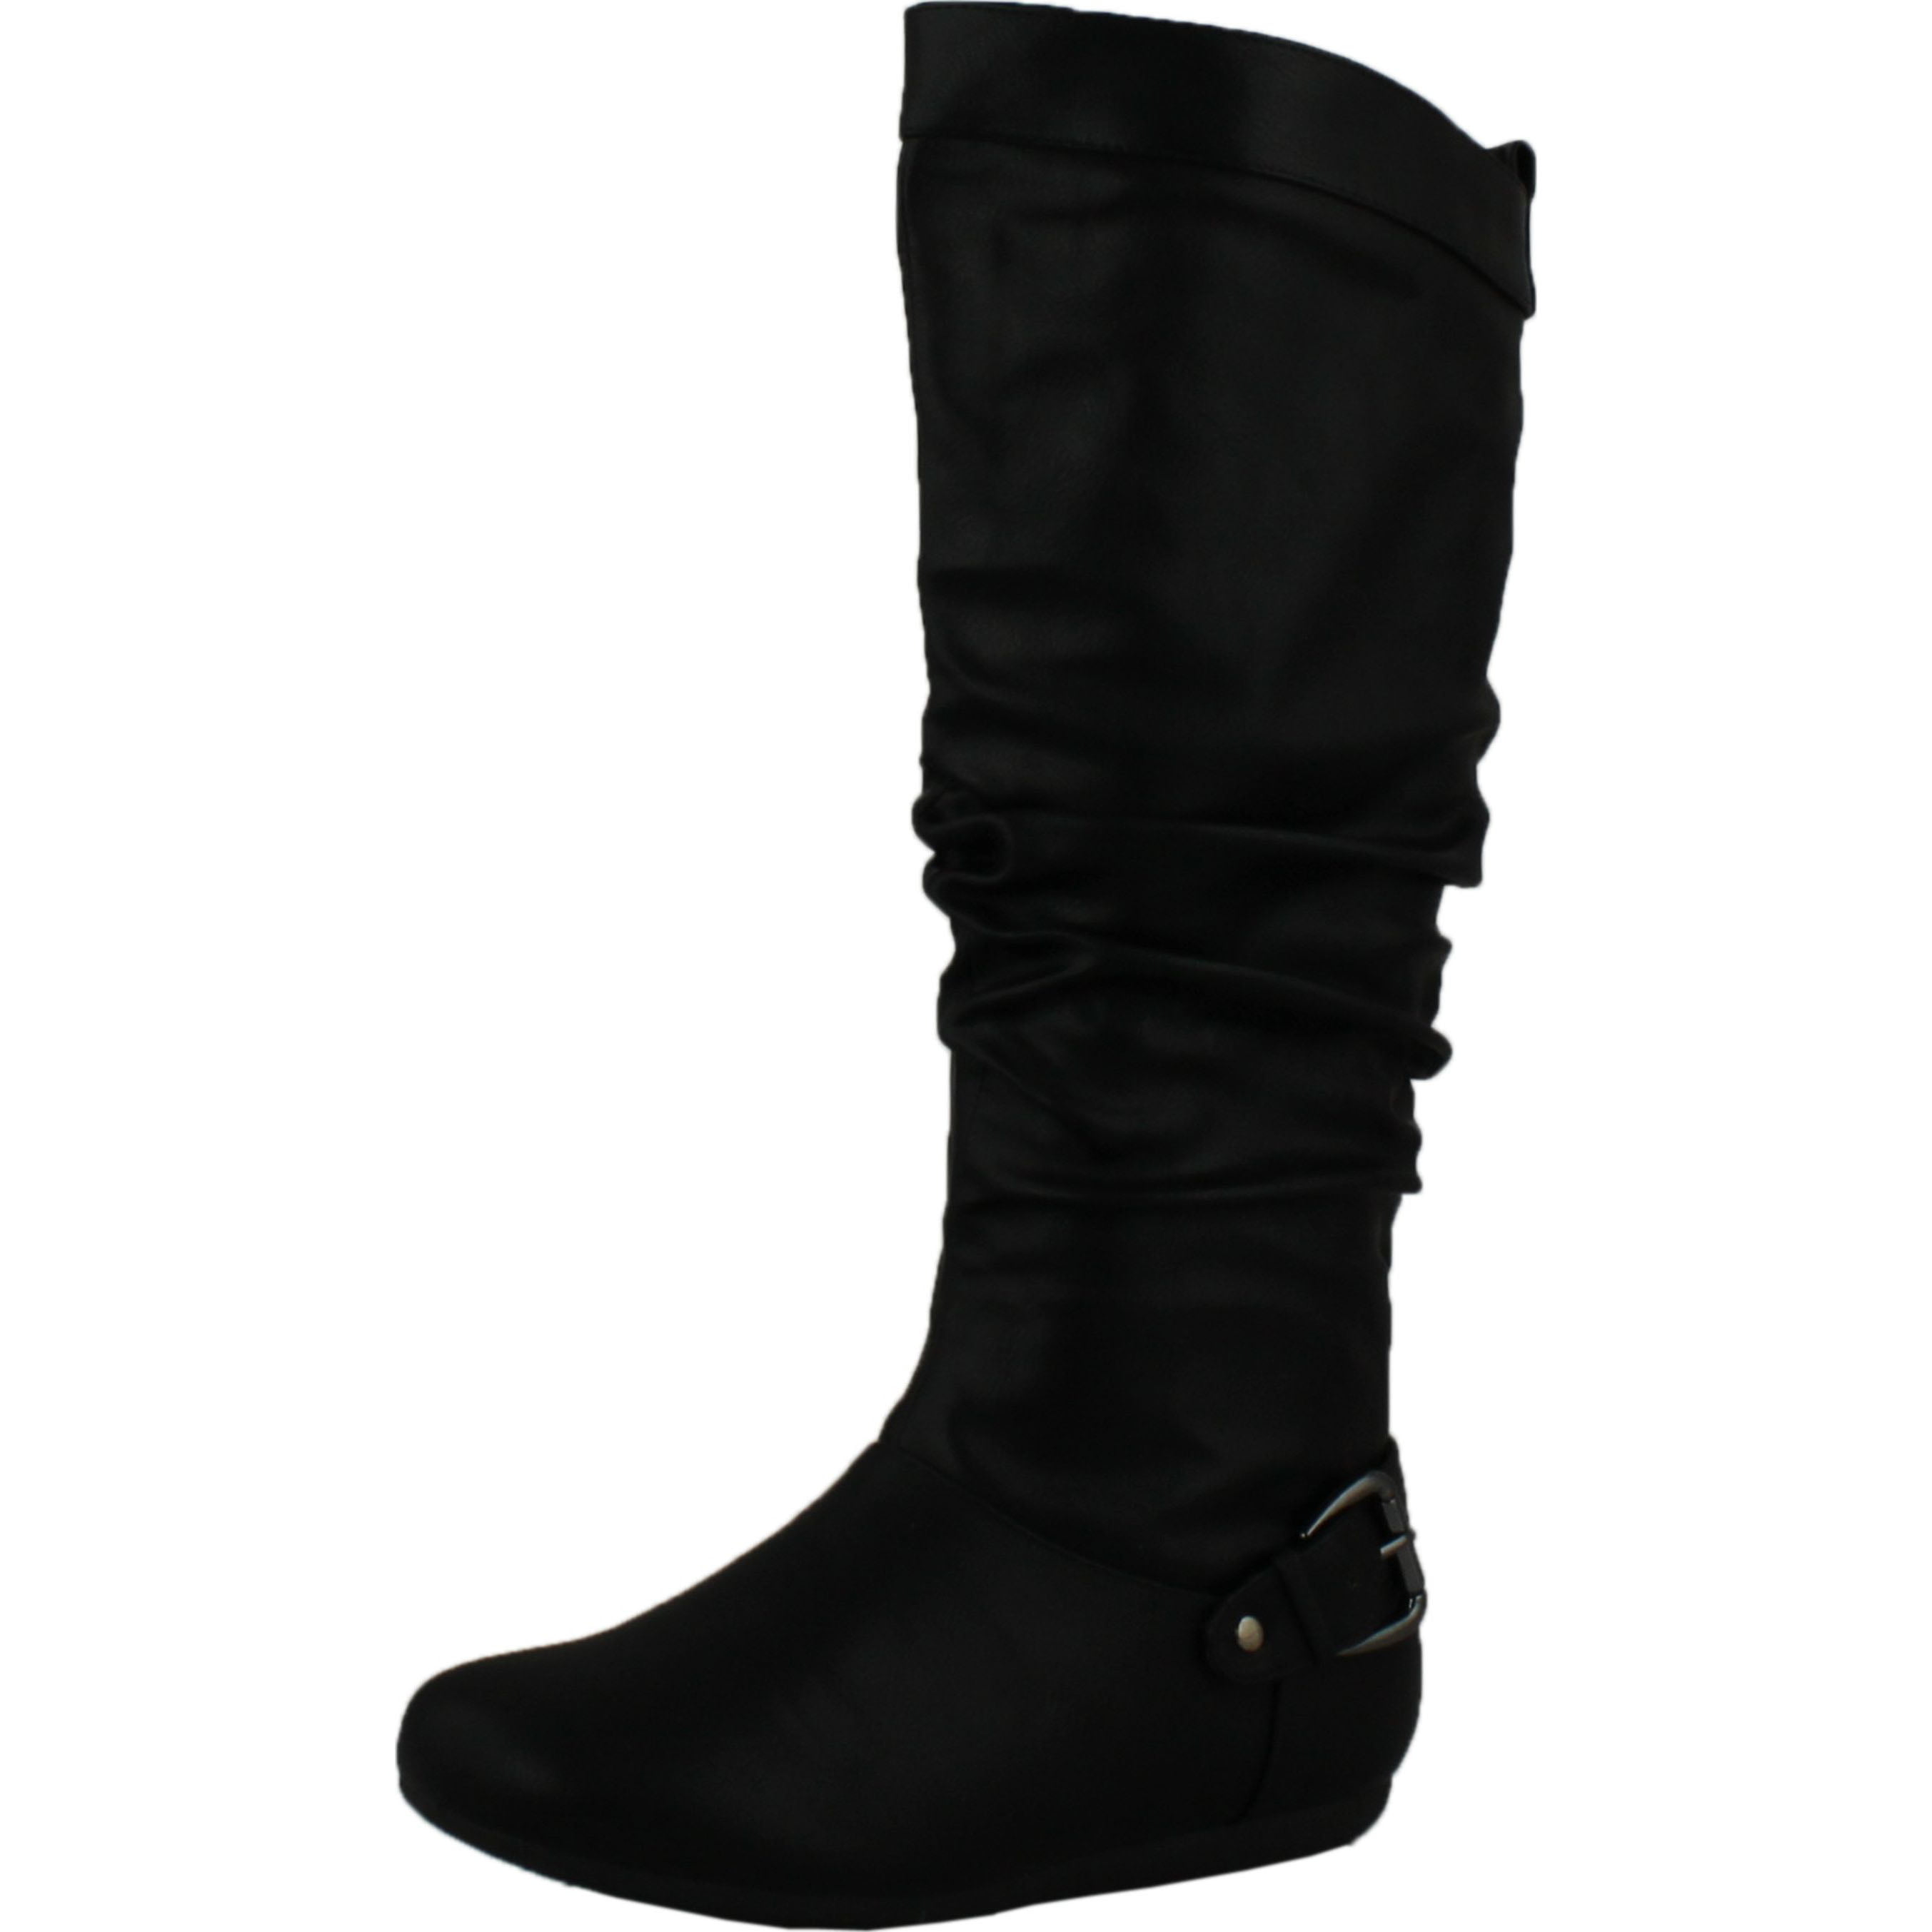 Top Moda Womens Local-61 Knee High Buckle Slouched Boots